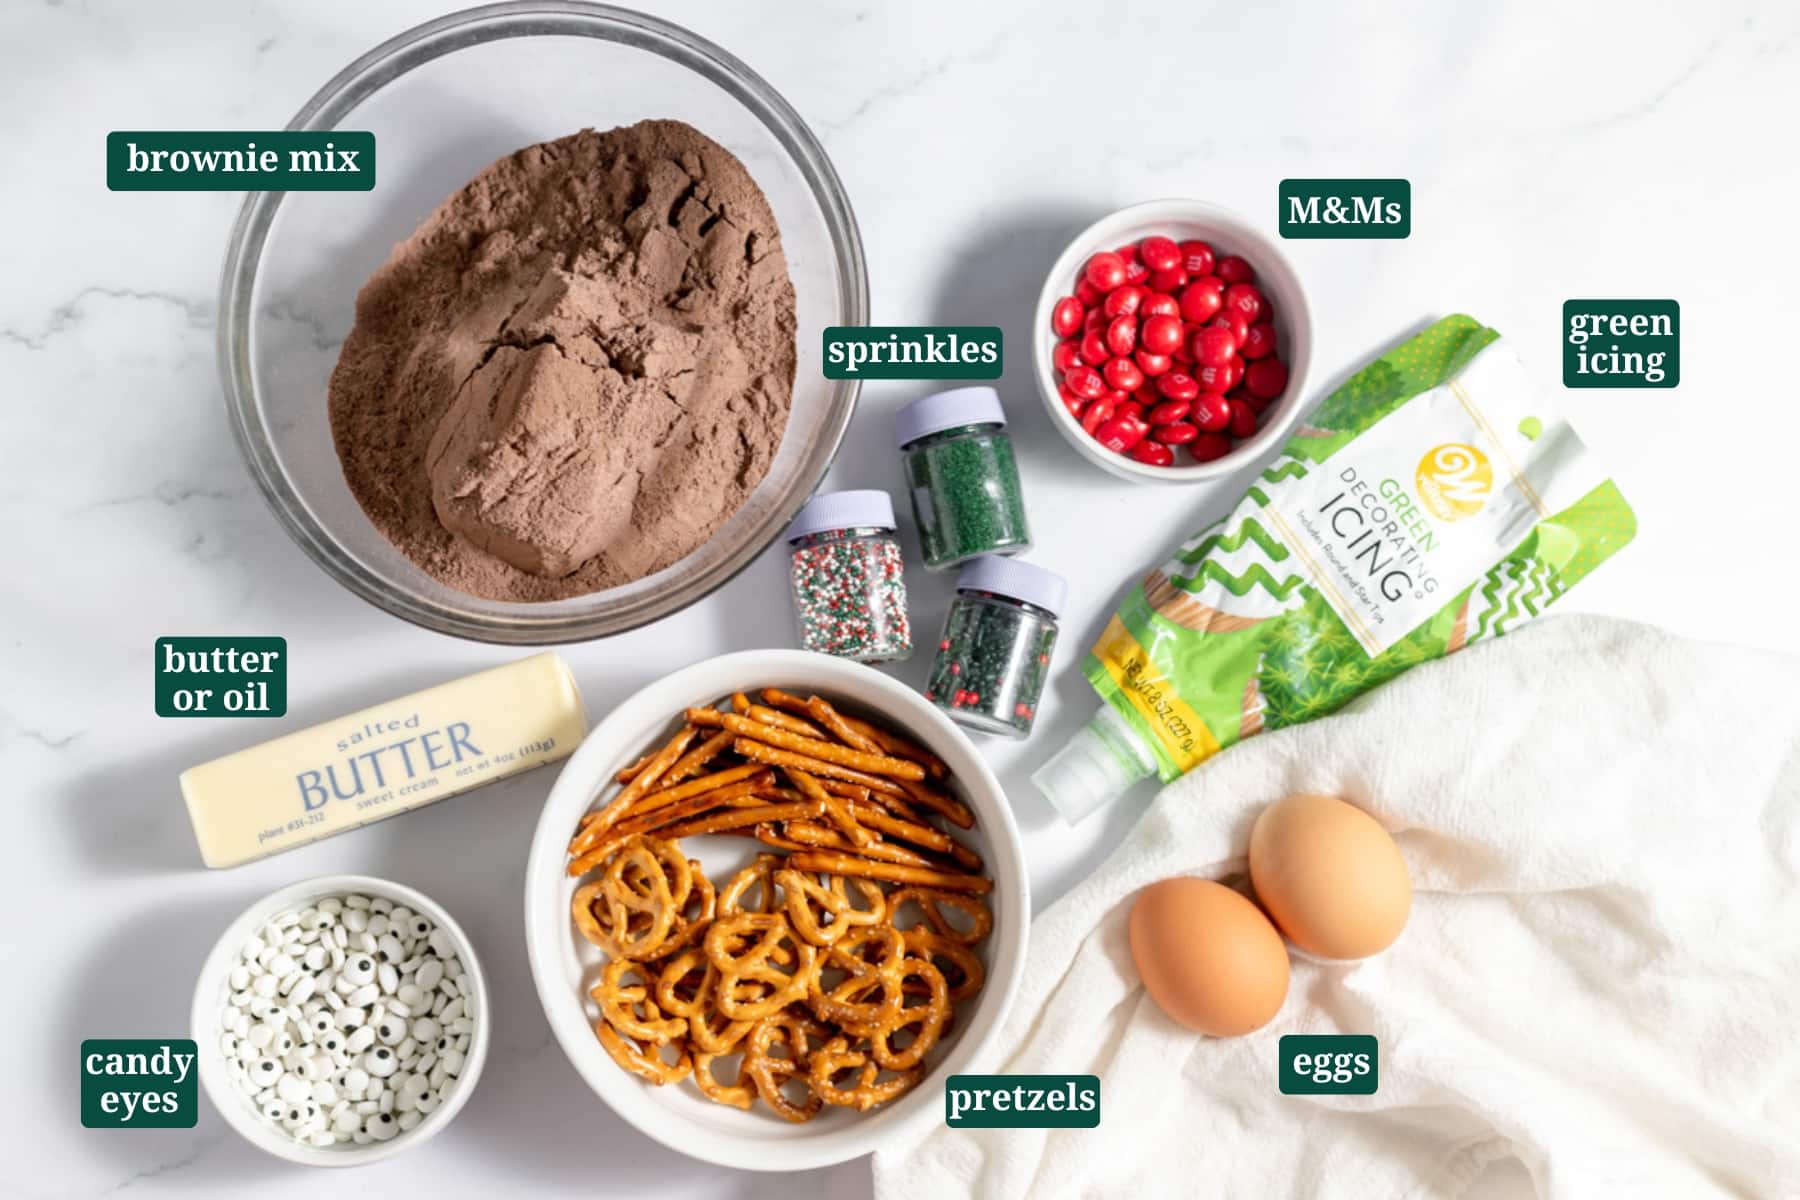 Ingredients in small bowls on a table for making Christmas brownies, including brownie mix, sprinkles, M&Ms, green icing, pretzels, eggs, butter, and candy eyes with text overlays over each ingredient.